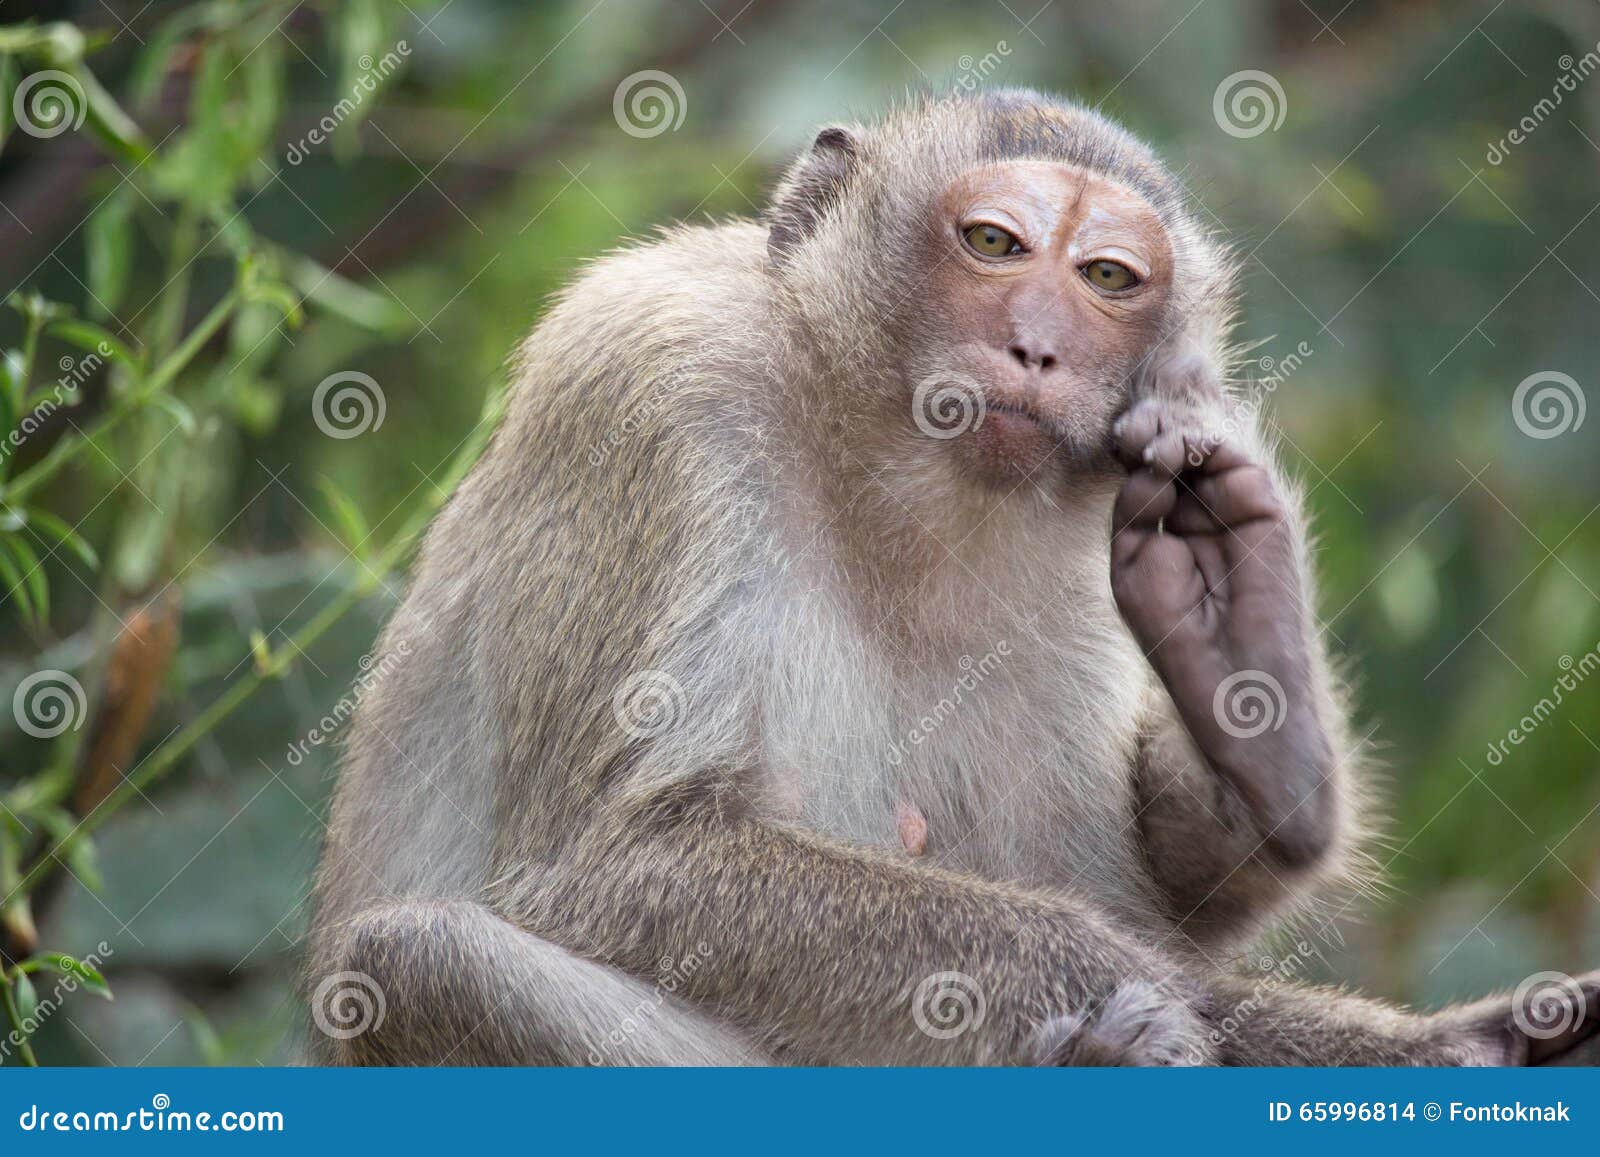 Funny monkeys stock photo. Image of forest, eating, tropical ...